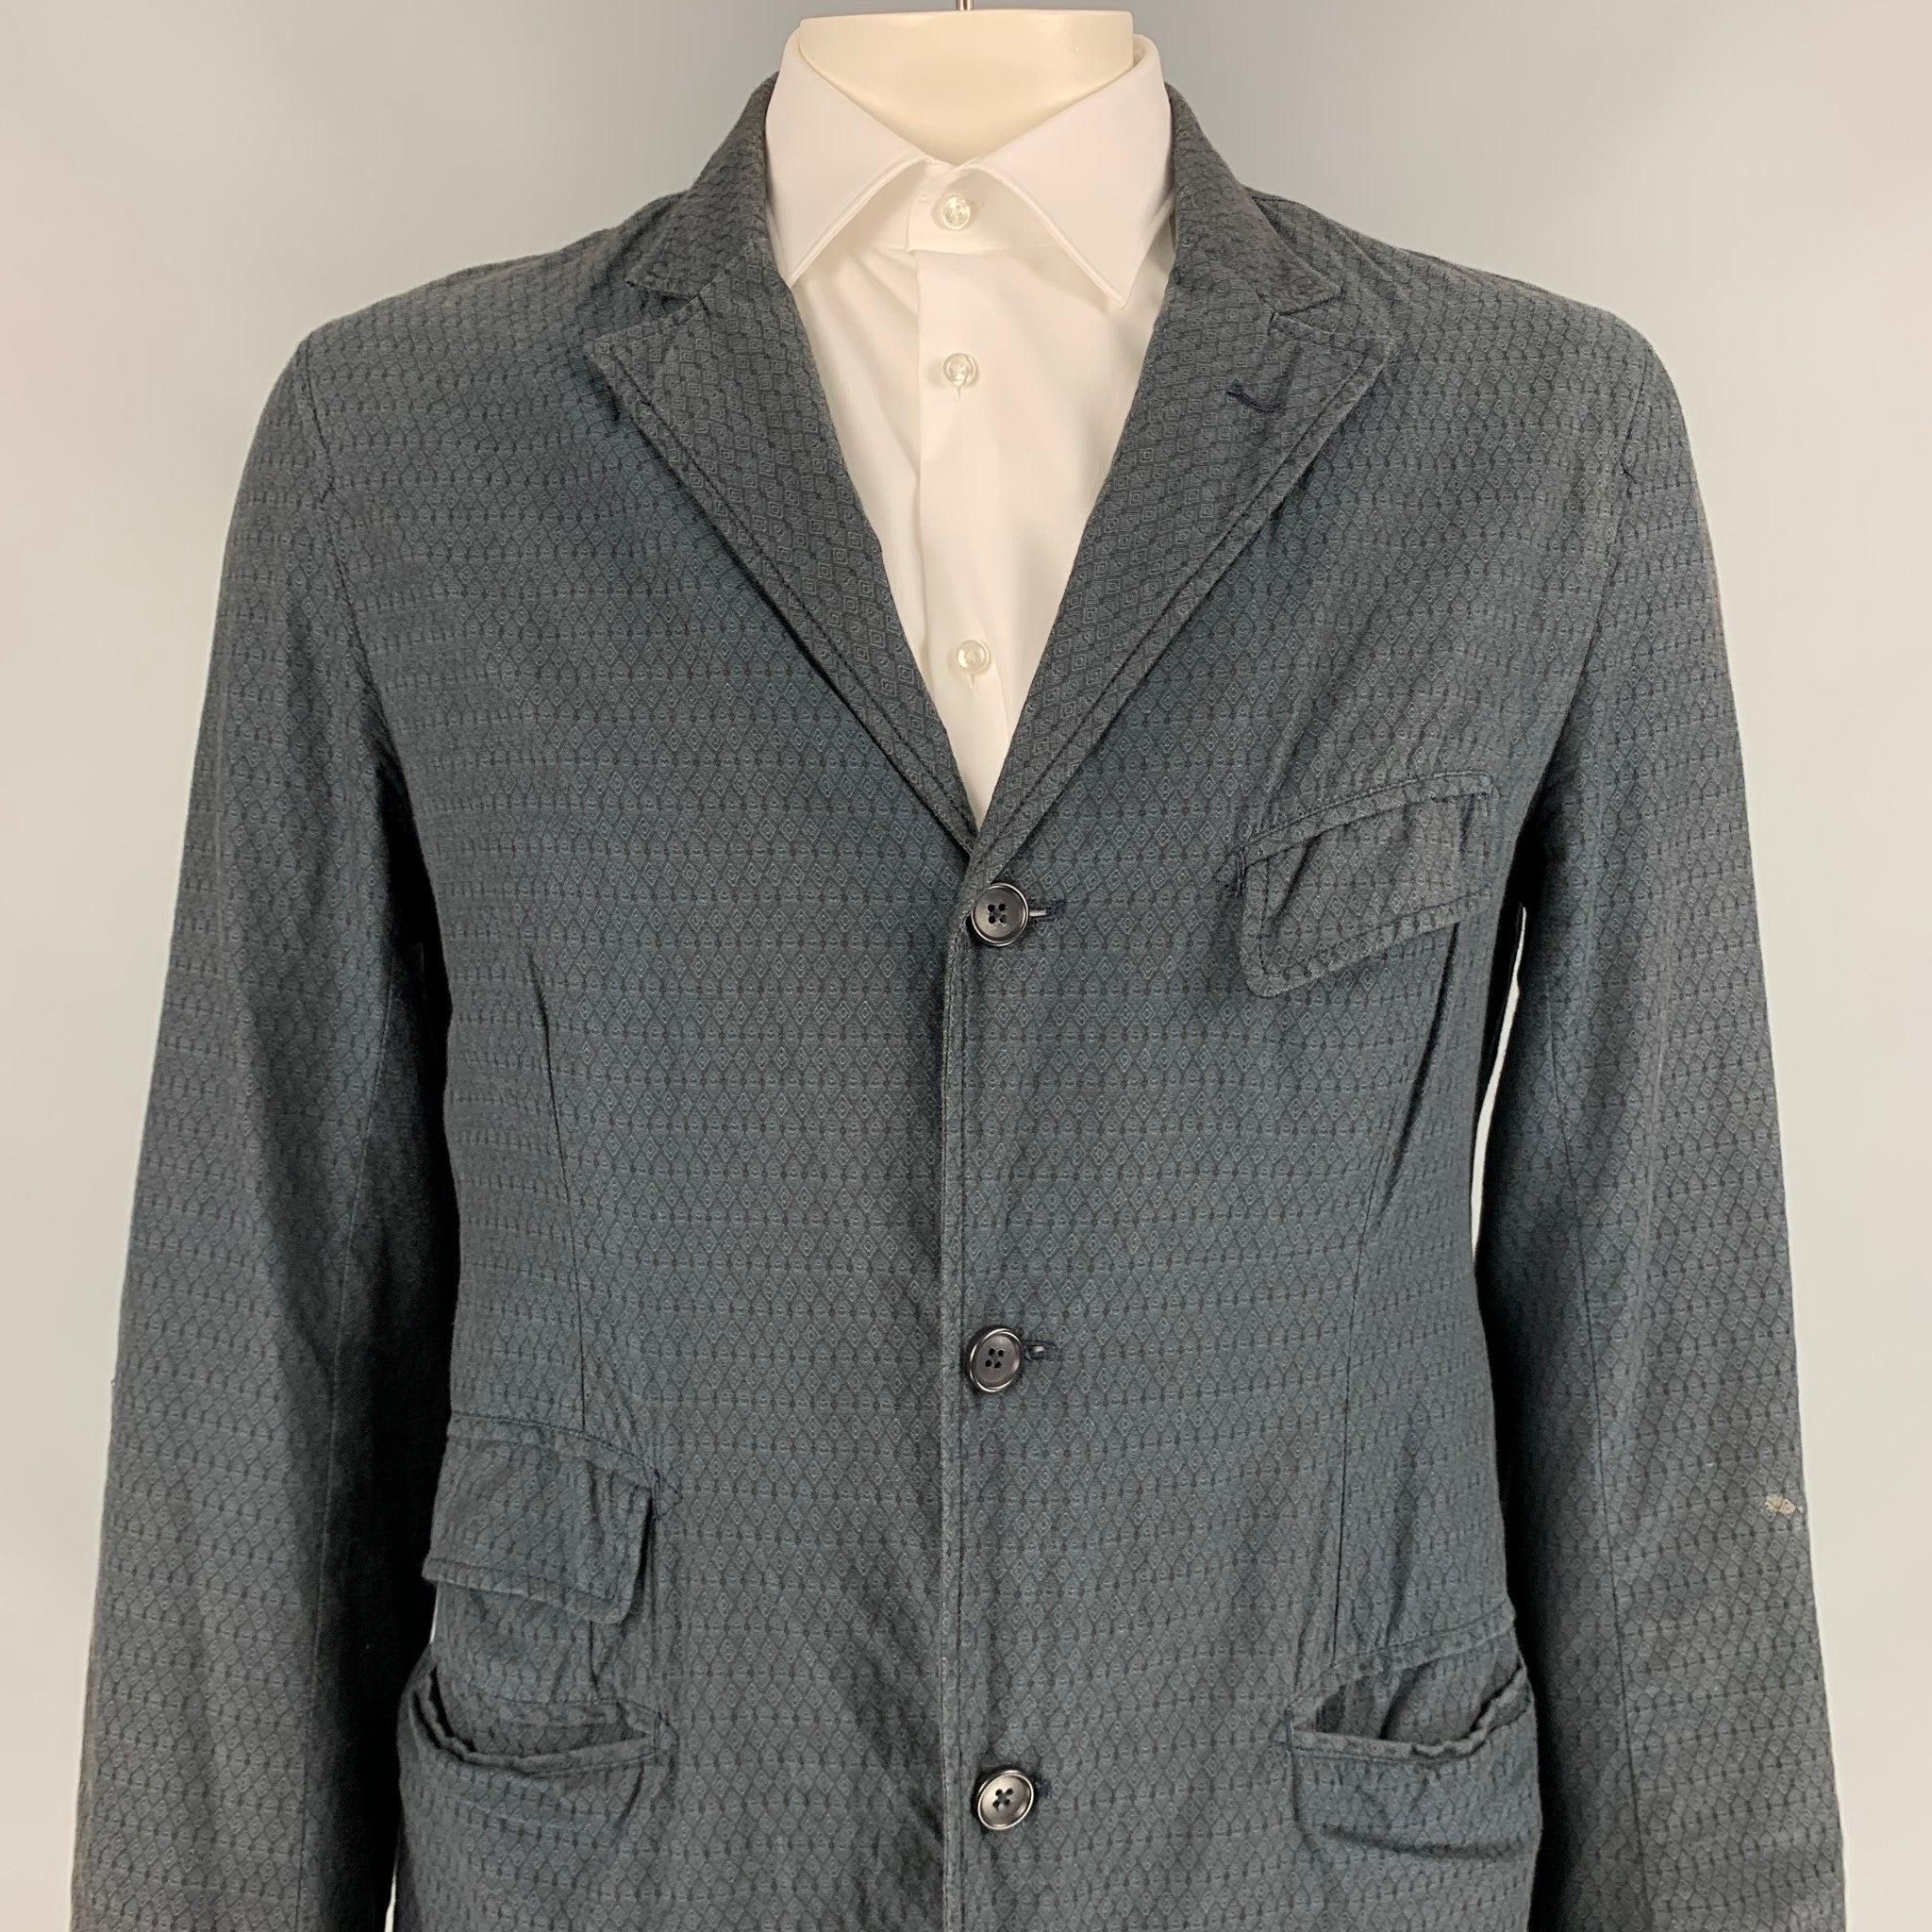 ENGINEERED GARMENTS sport coat comes in a charcoal rhombus cotton with a full liner featuring a notch lapel, front pockets, single back vent, and a three button closure. Made in USA.
Very Good
Pre-Owned Condition. 

Marked:   XL  

Measurements: 
